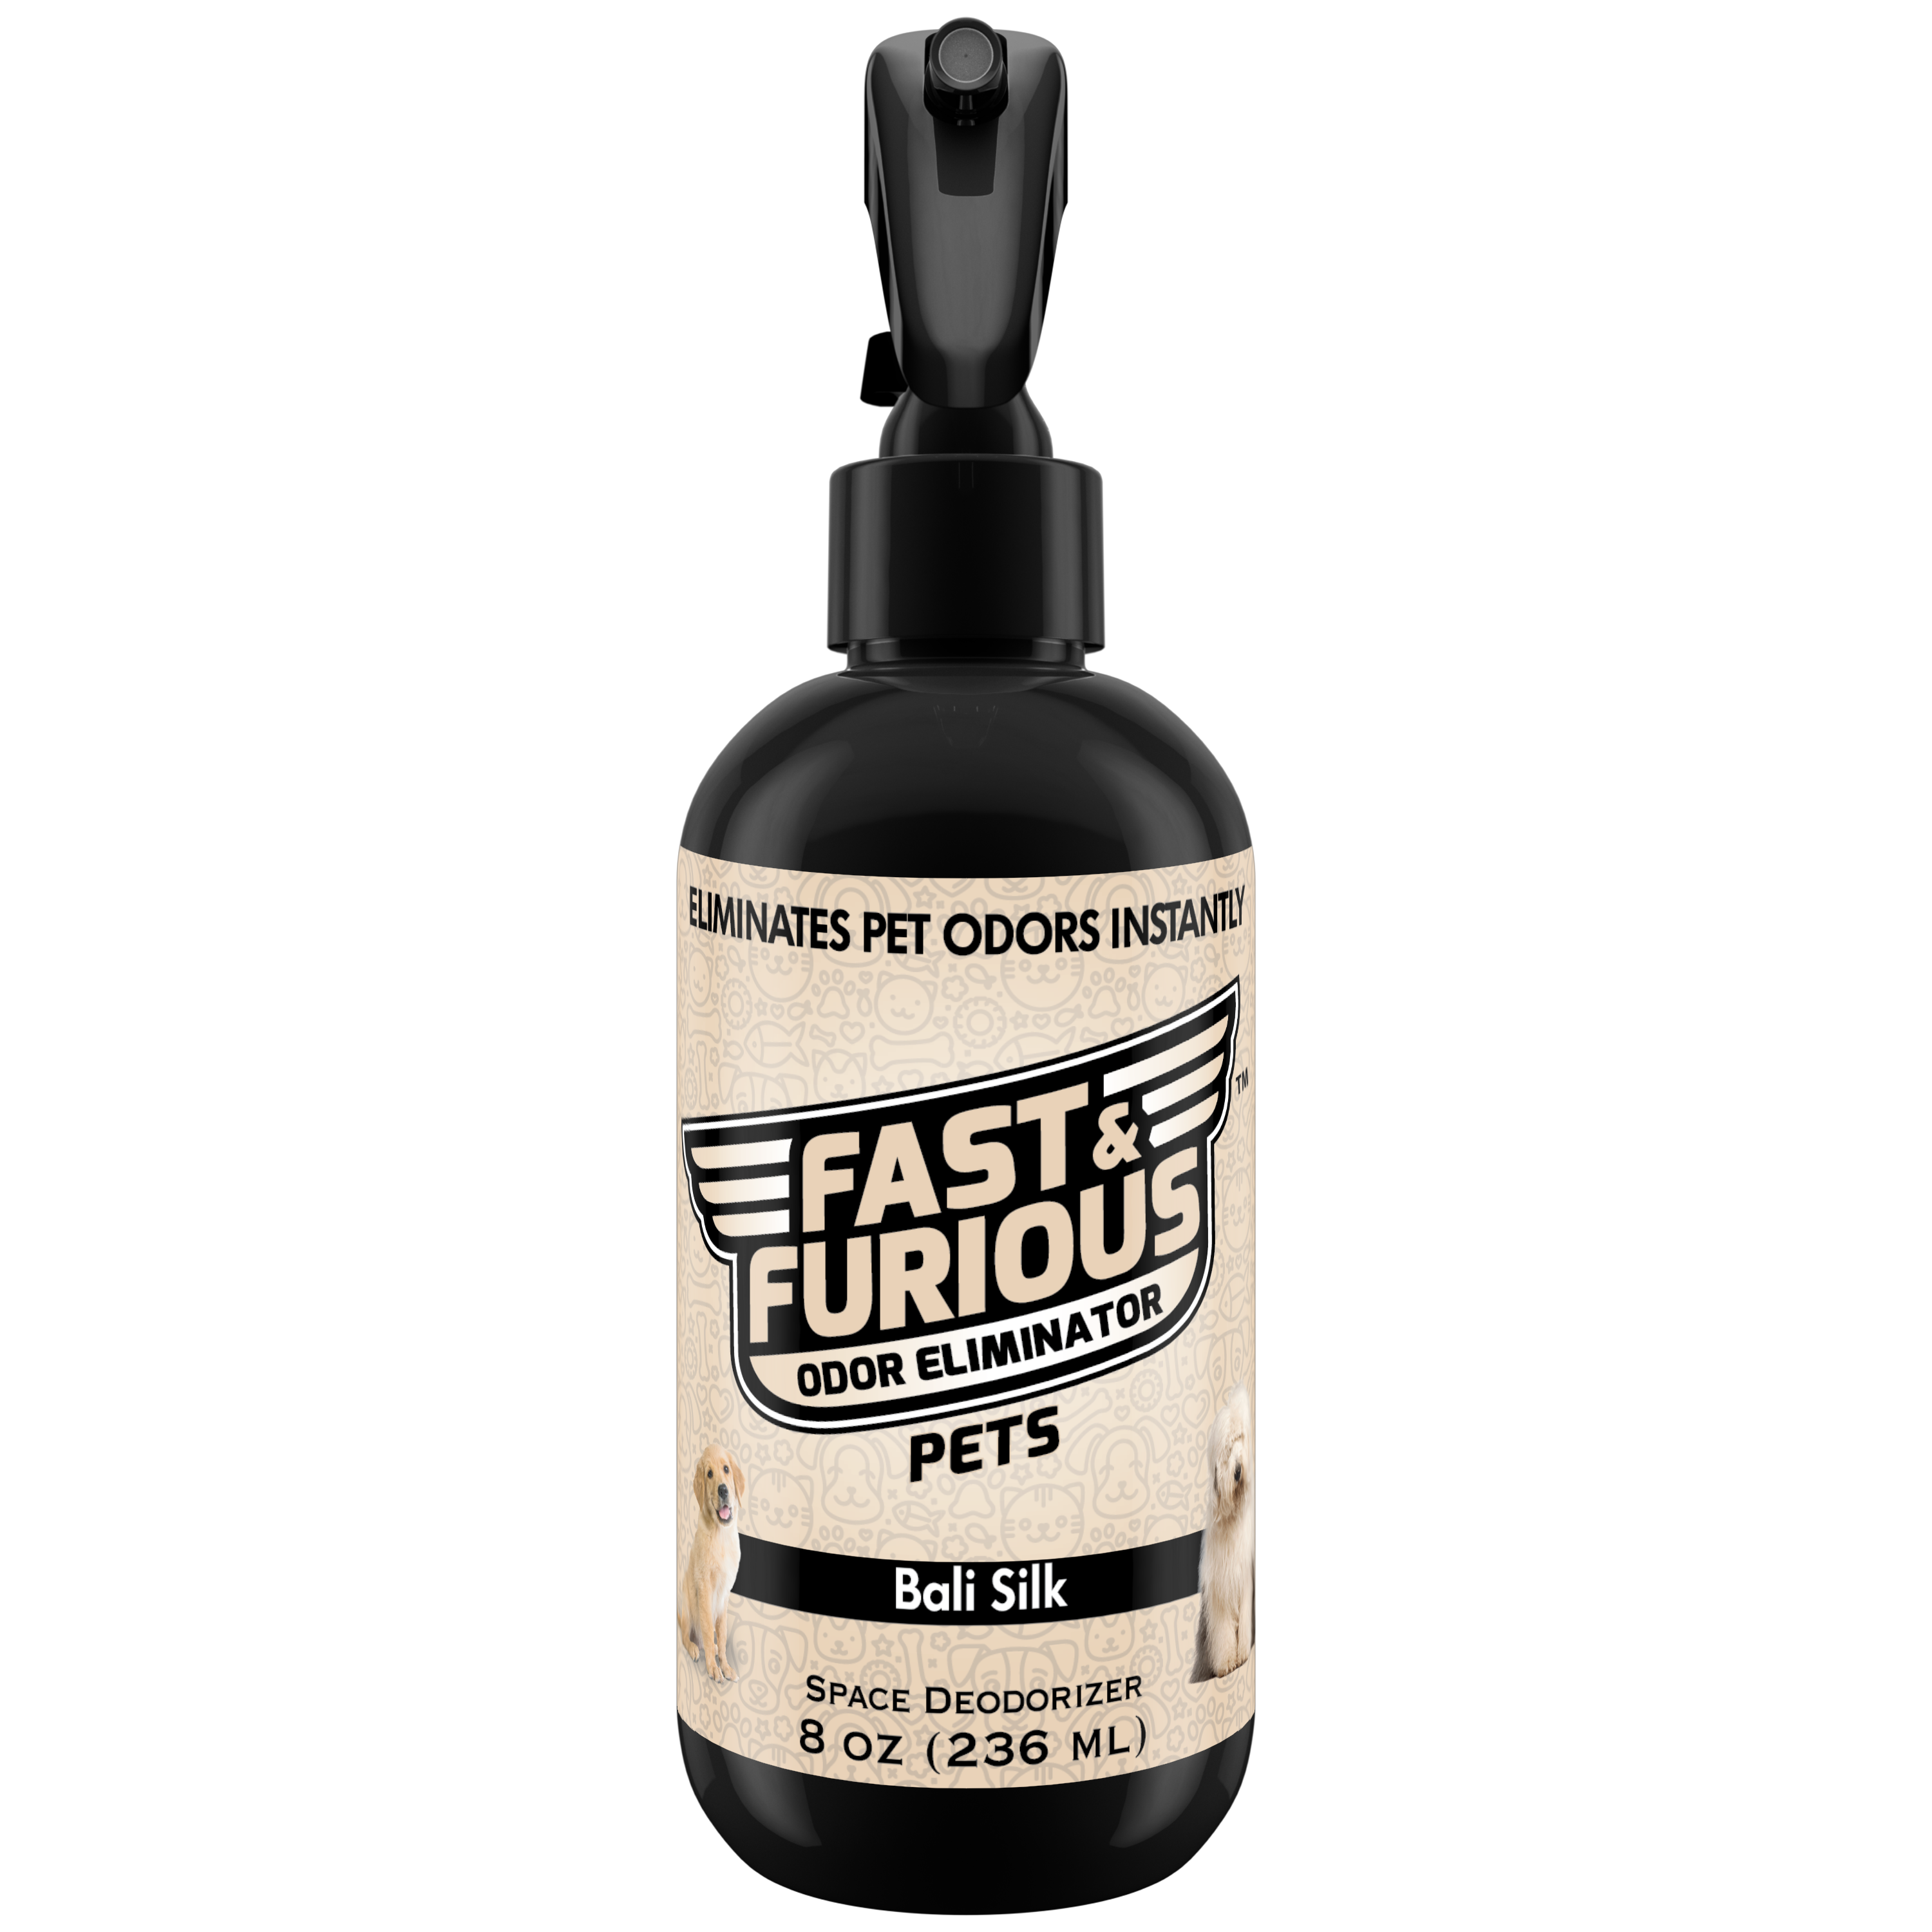 Fast and Furious Pets Odor Eliminator - Bali Silk Scent